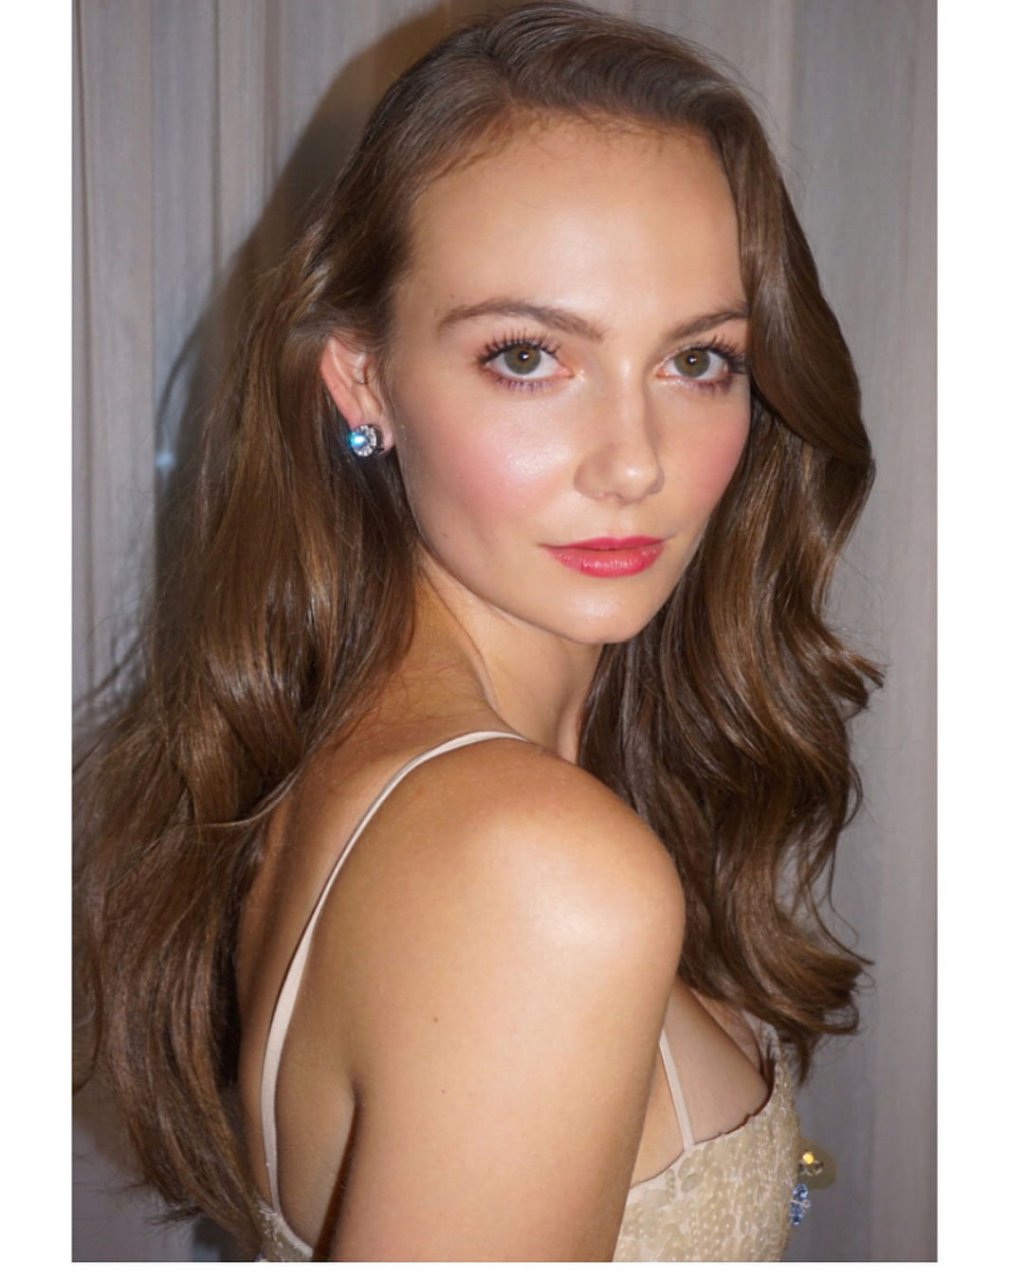 Check out the sexy non-nude photos of Andi Matichak in recent years. 